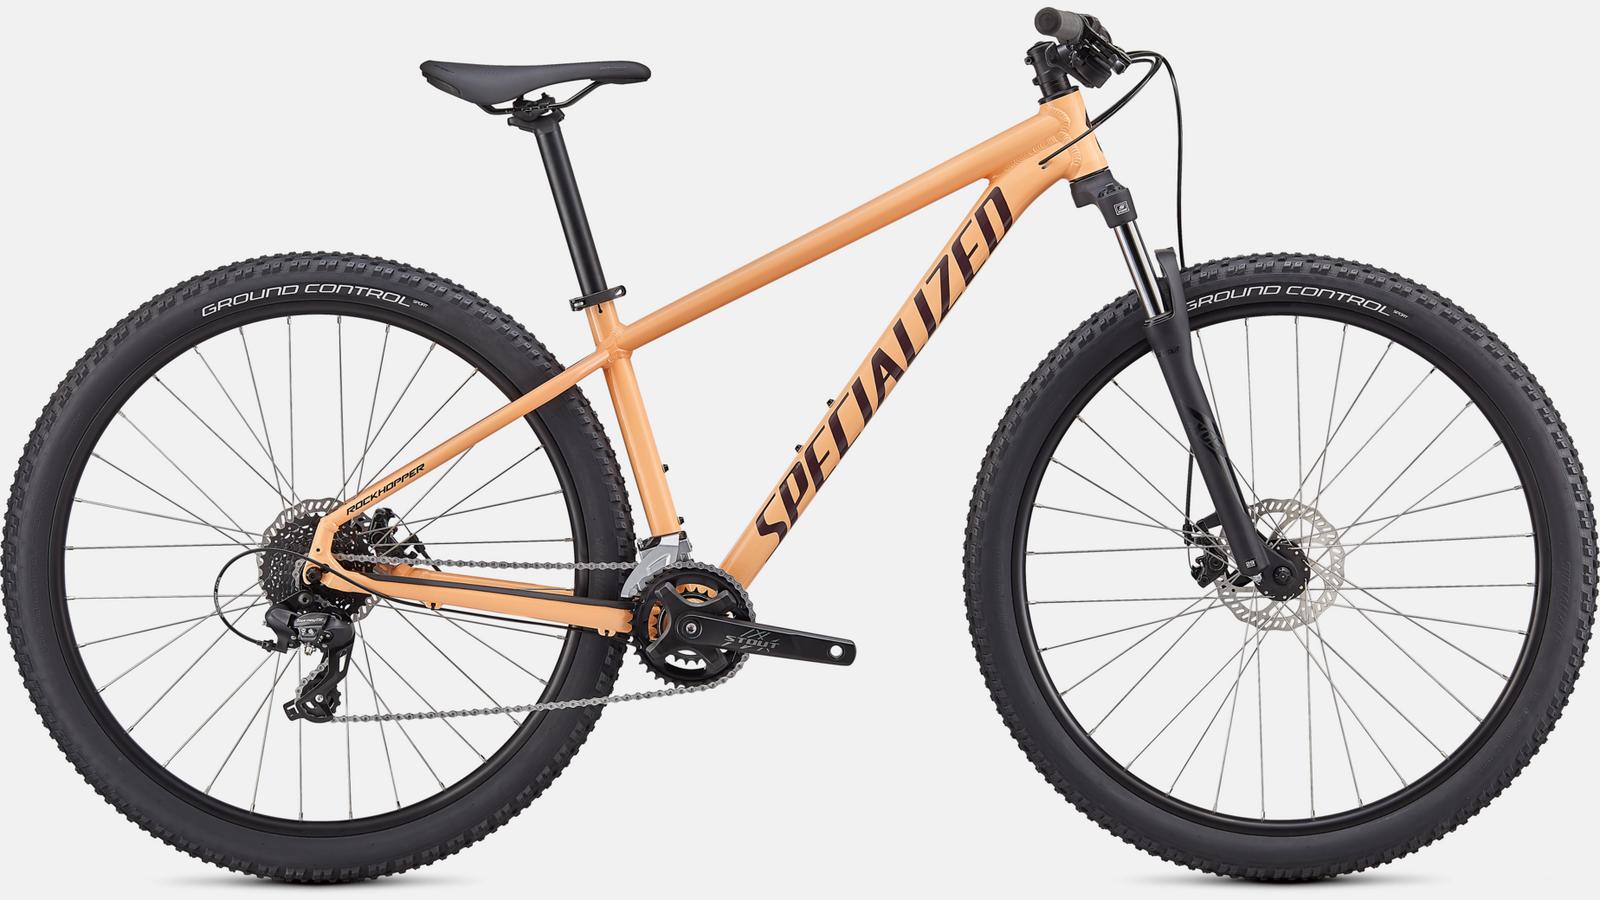 Paint for 2021 Specialized Rockhopper - Gloss Ice Papaya